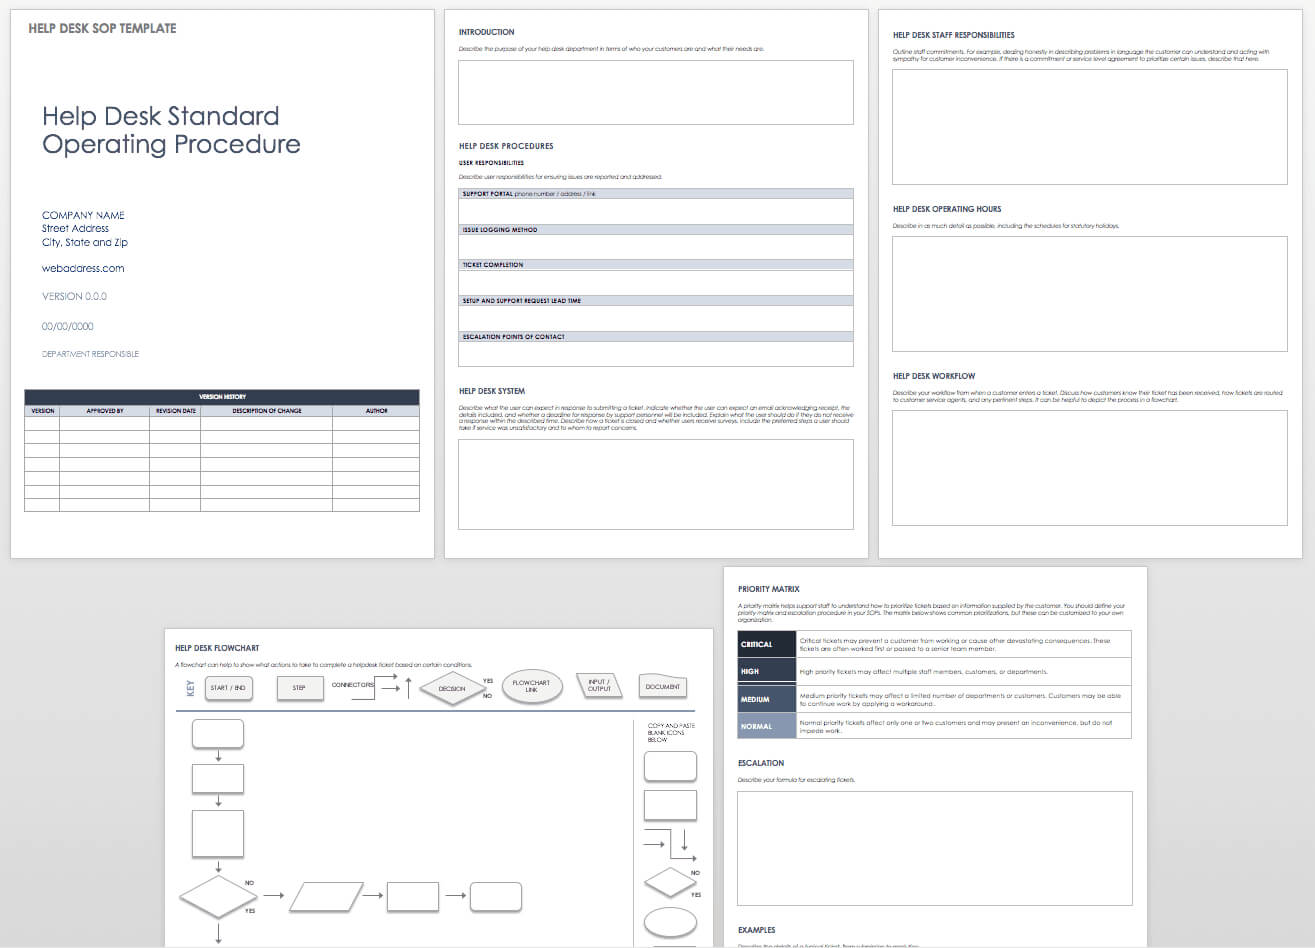 Standard Operating Procedures Templates | Smartsheet With Hours Of Operation Template Microsoft Word